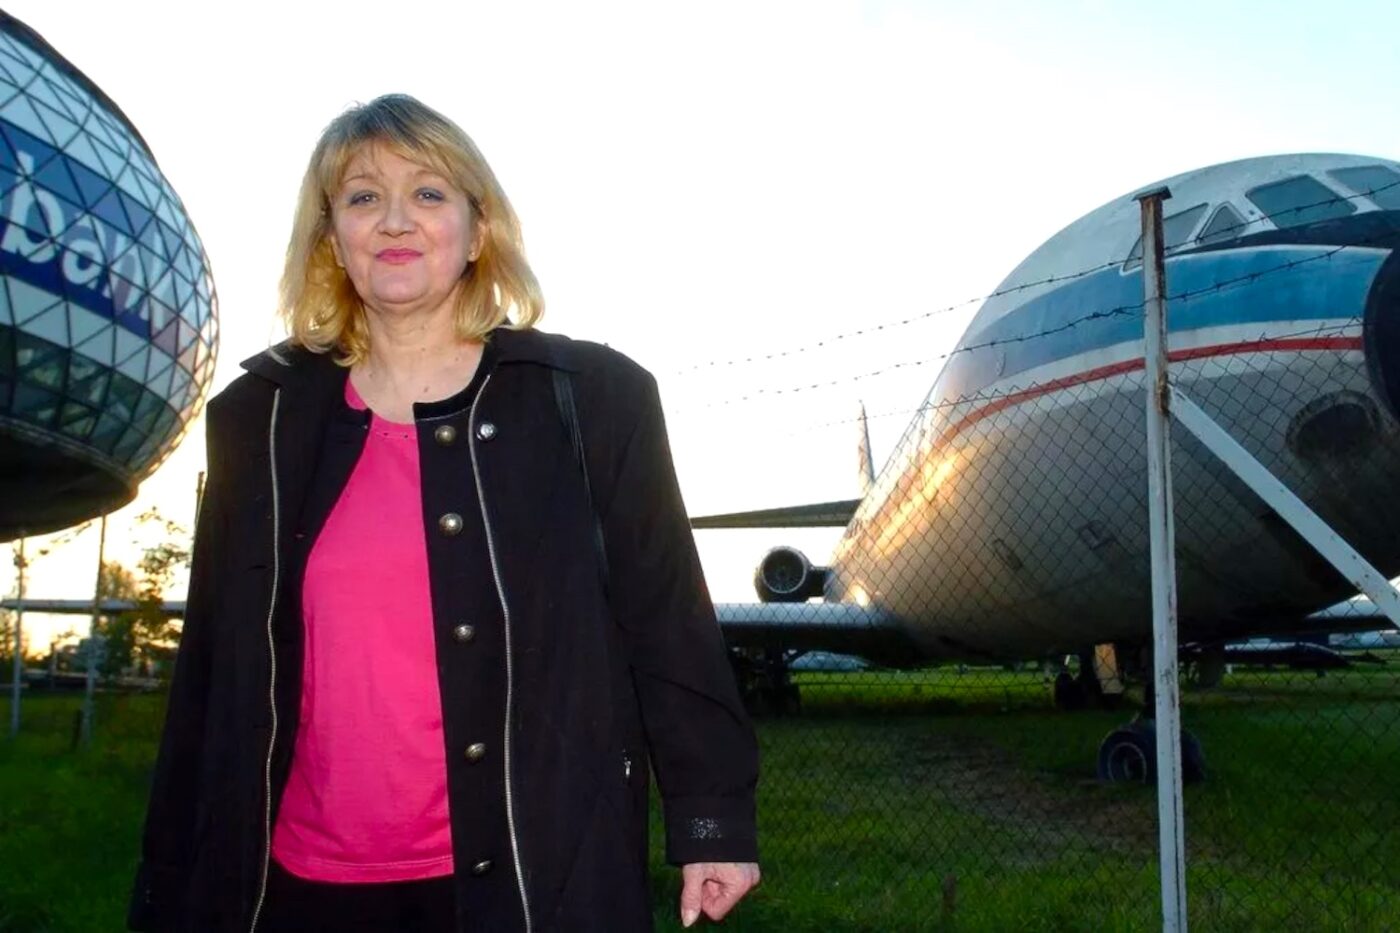 Vesna Vulovic, The Flight Attendant Who Survived A 30,000 Feet Fall From Plane Without Parachute